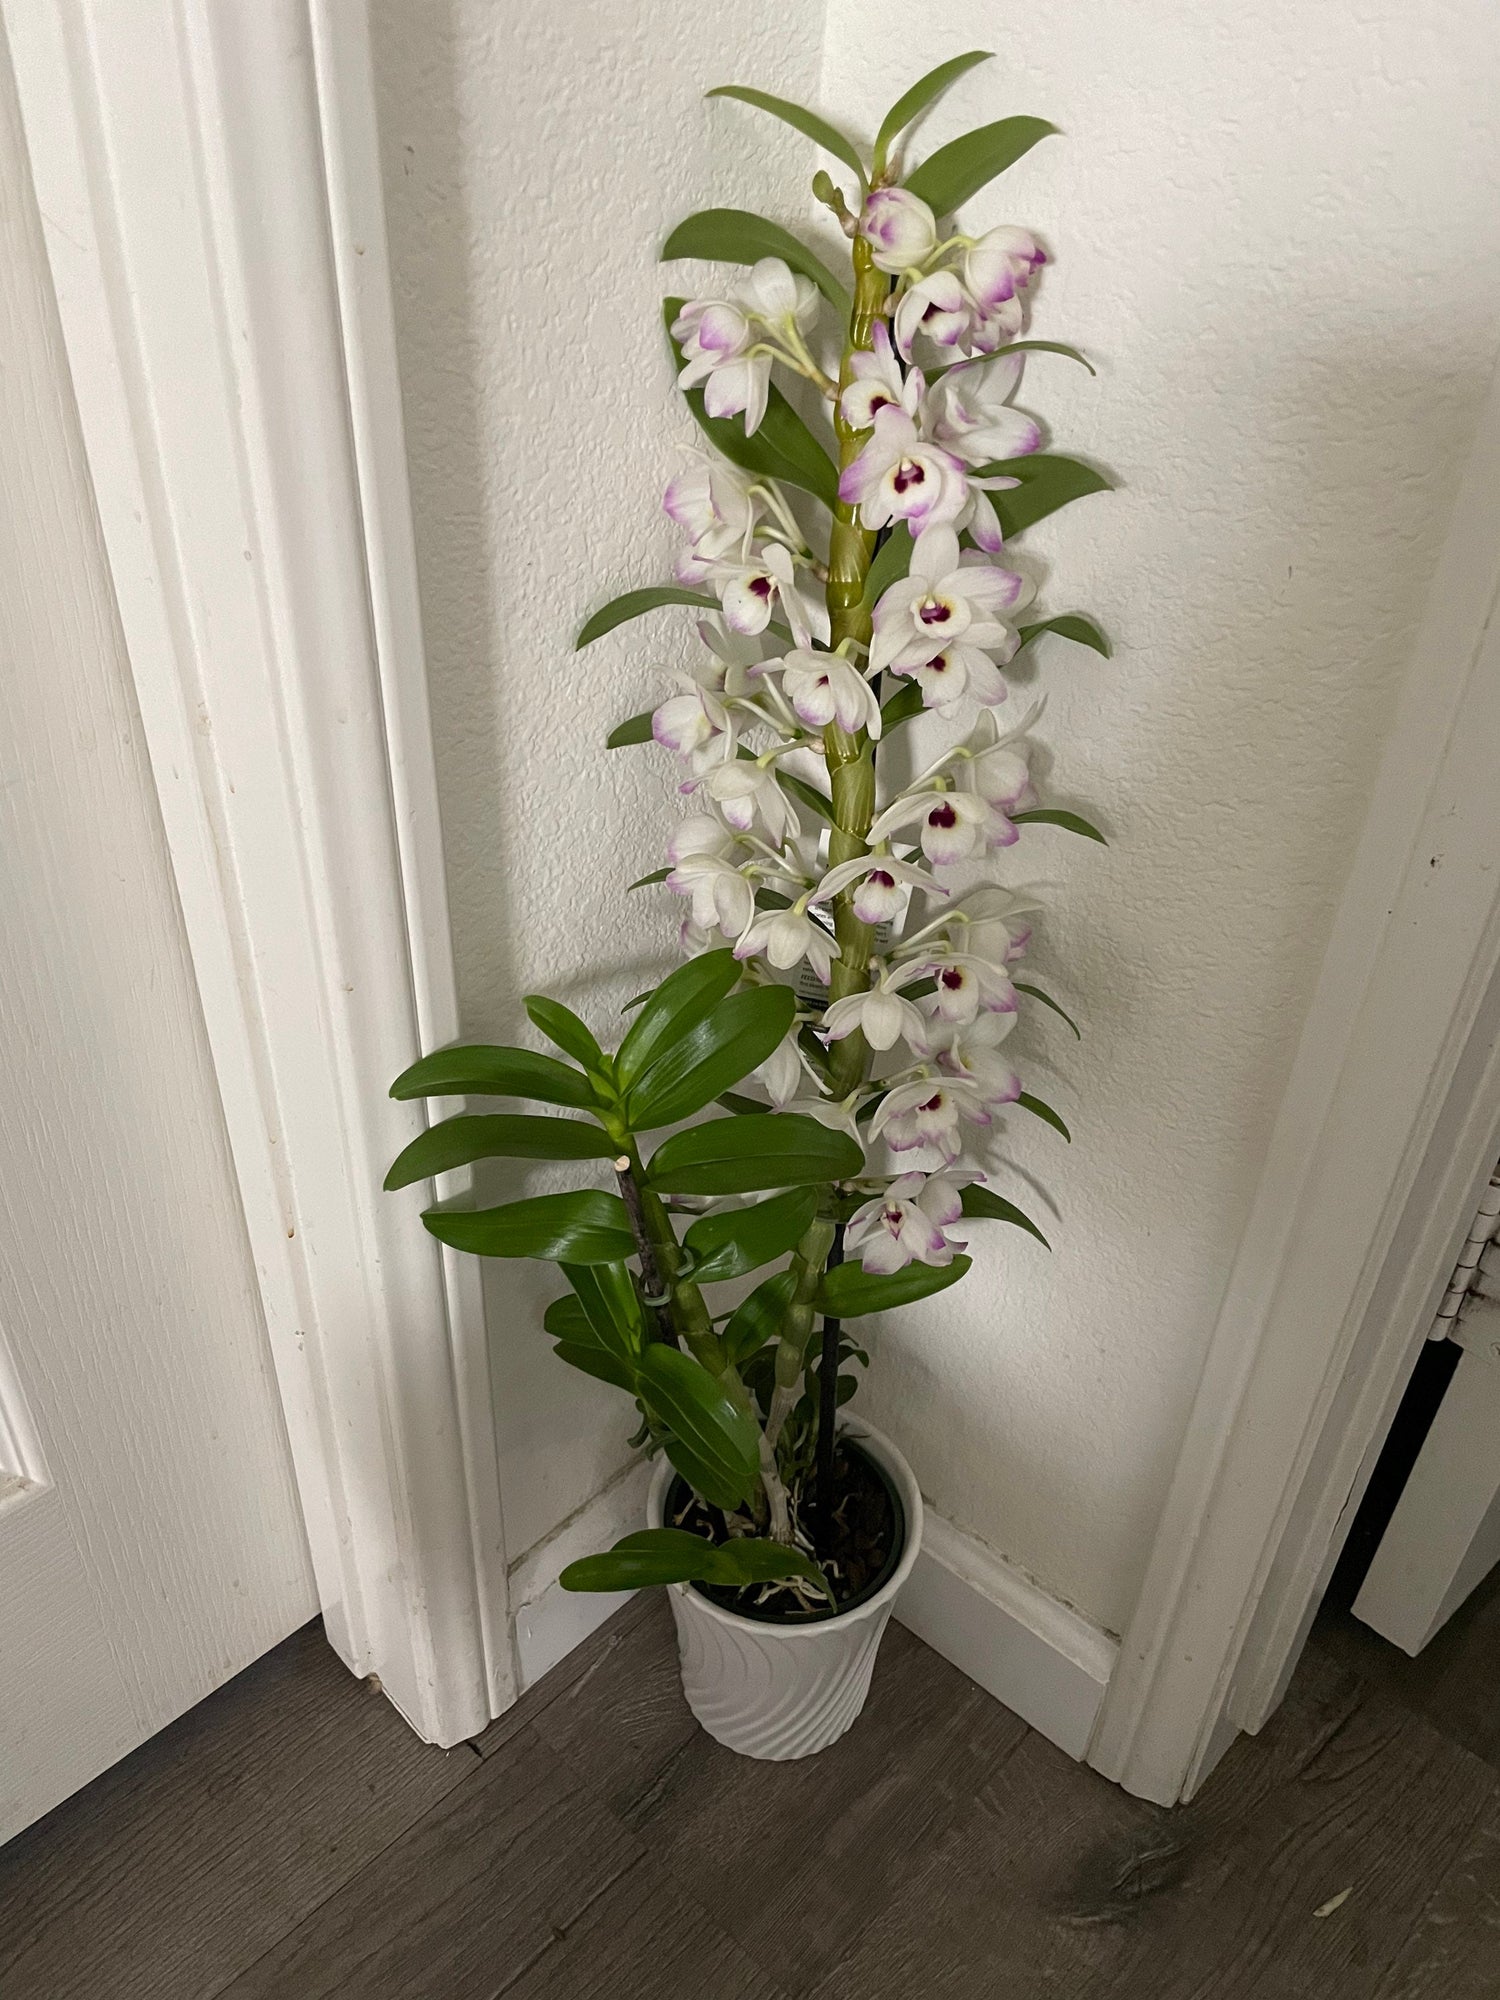 XL -1-2ft tall blooming pink and white dendrobium nobile in decorative pot. Perfect gift for the plant lover!-not exact plant -color vary